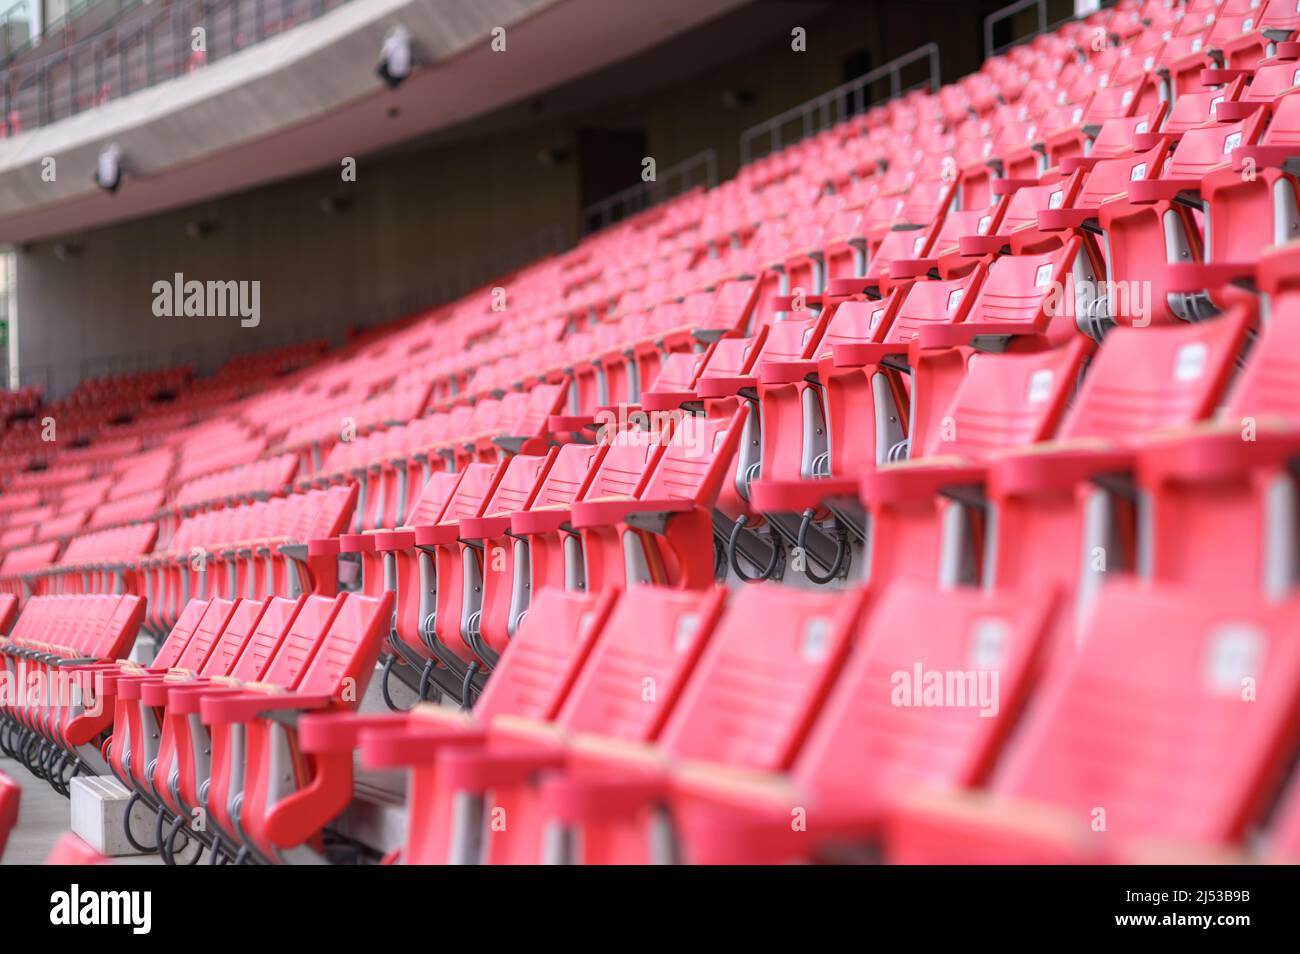 Rows of empty red plastic chairs at a sports stadium. Stock Photo